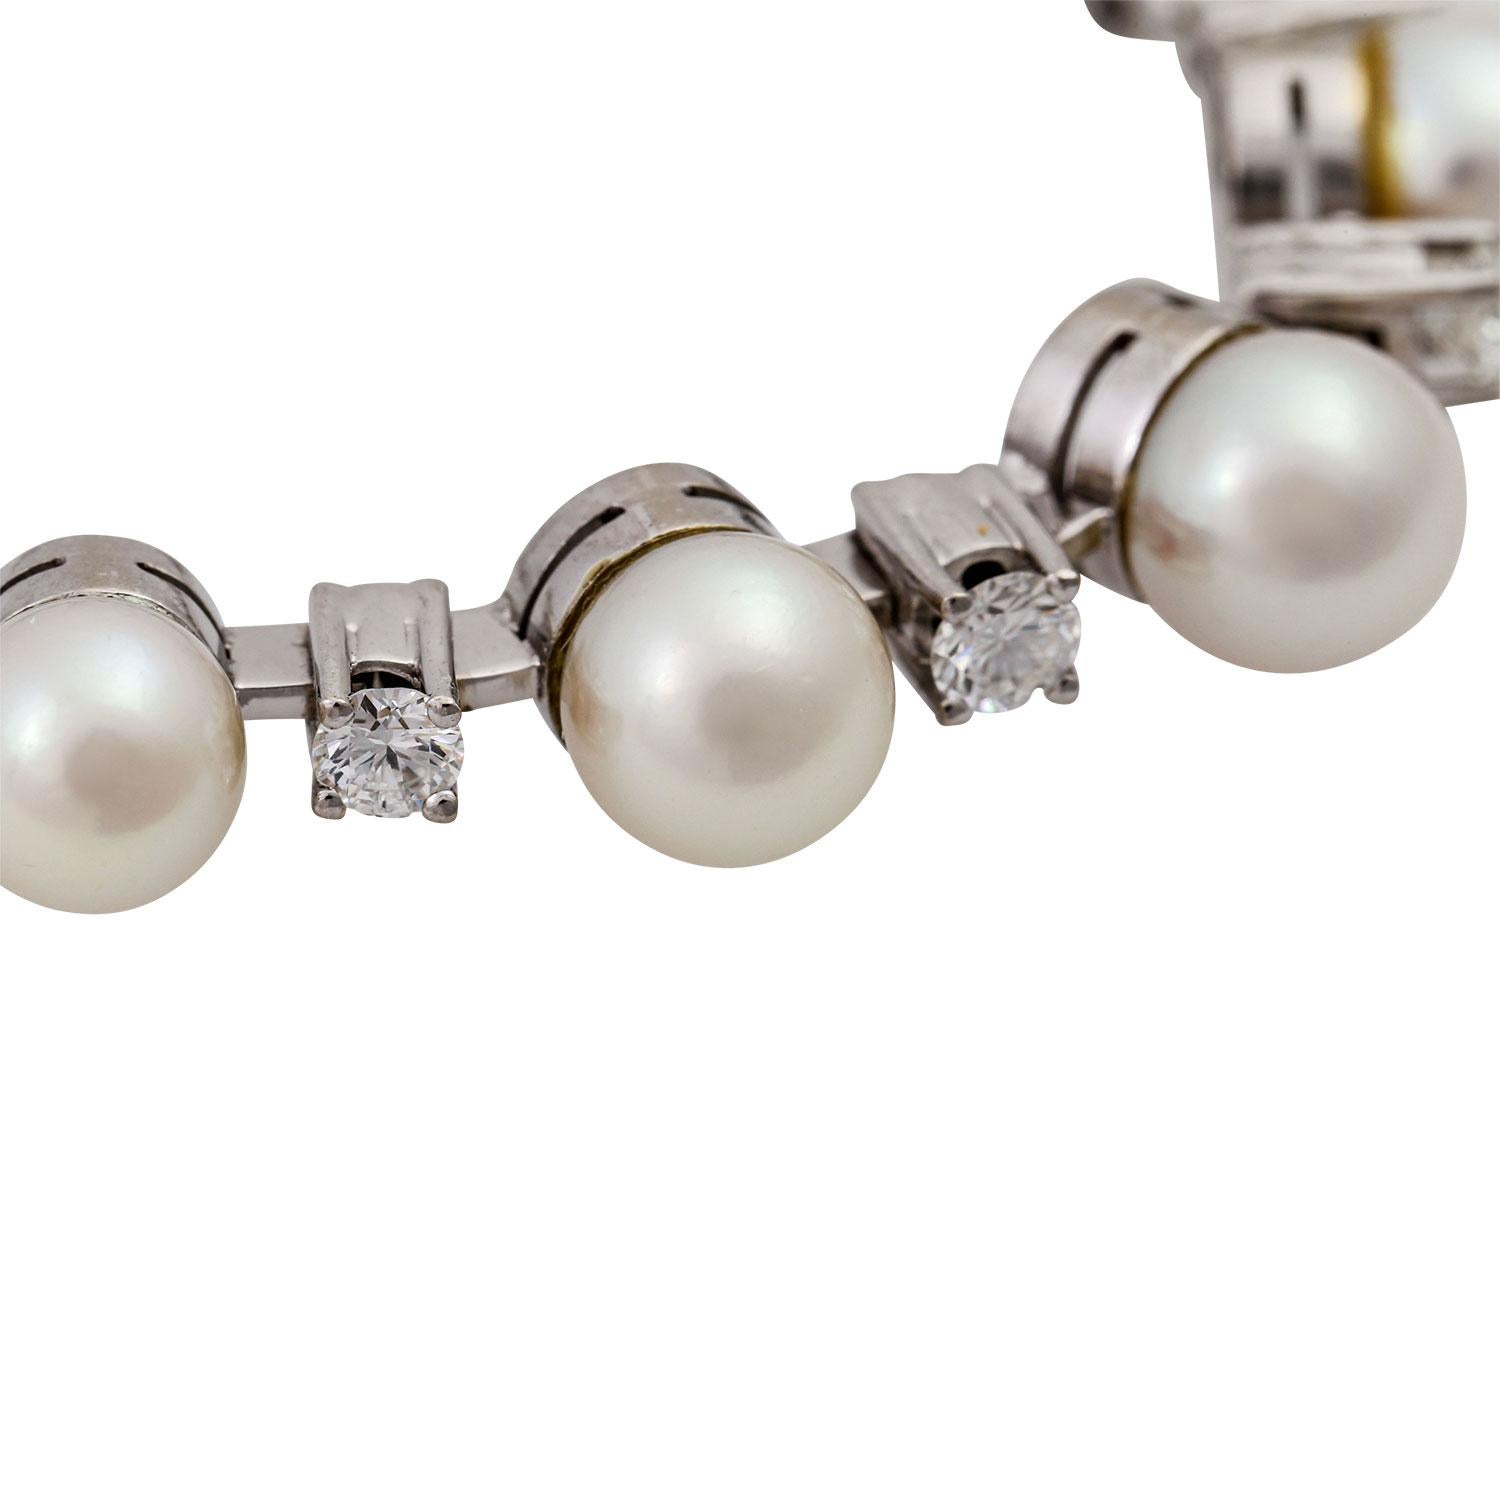 Women's Bracelet with 7 cultured pearls For Sale